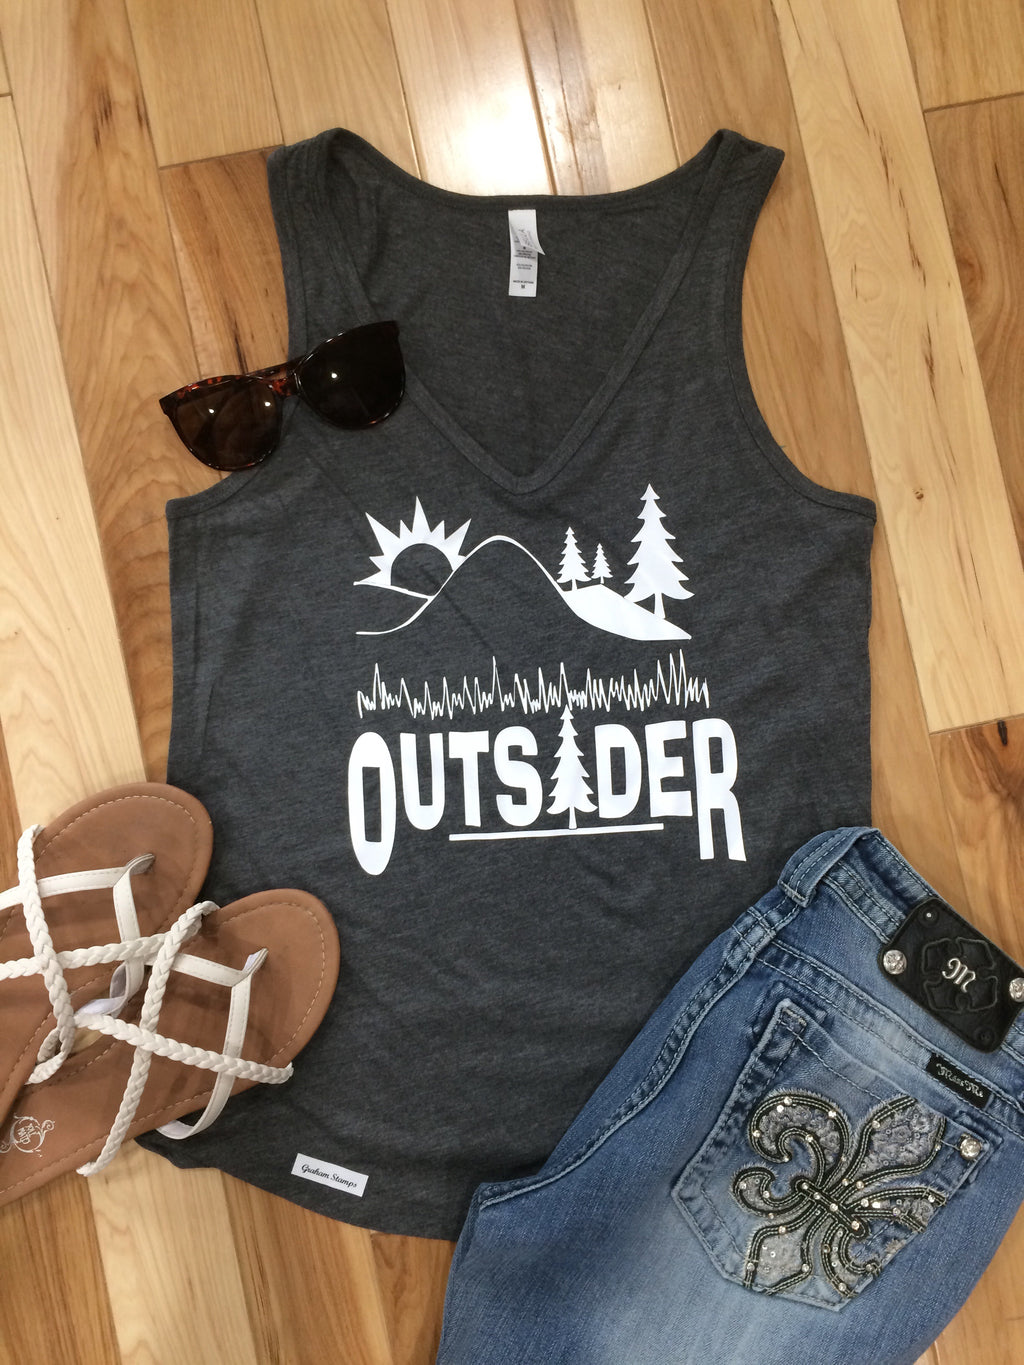 Outsider tank top